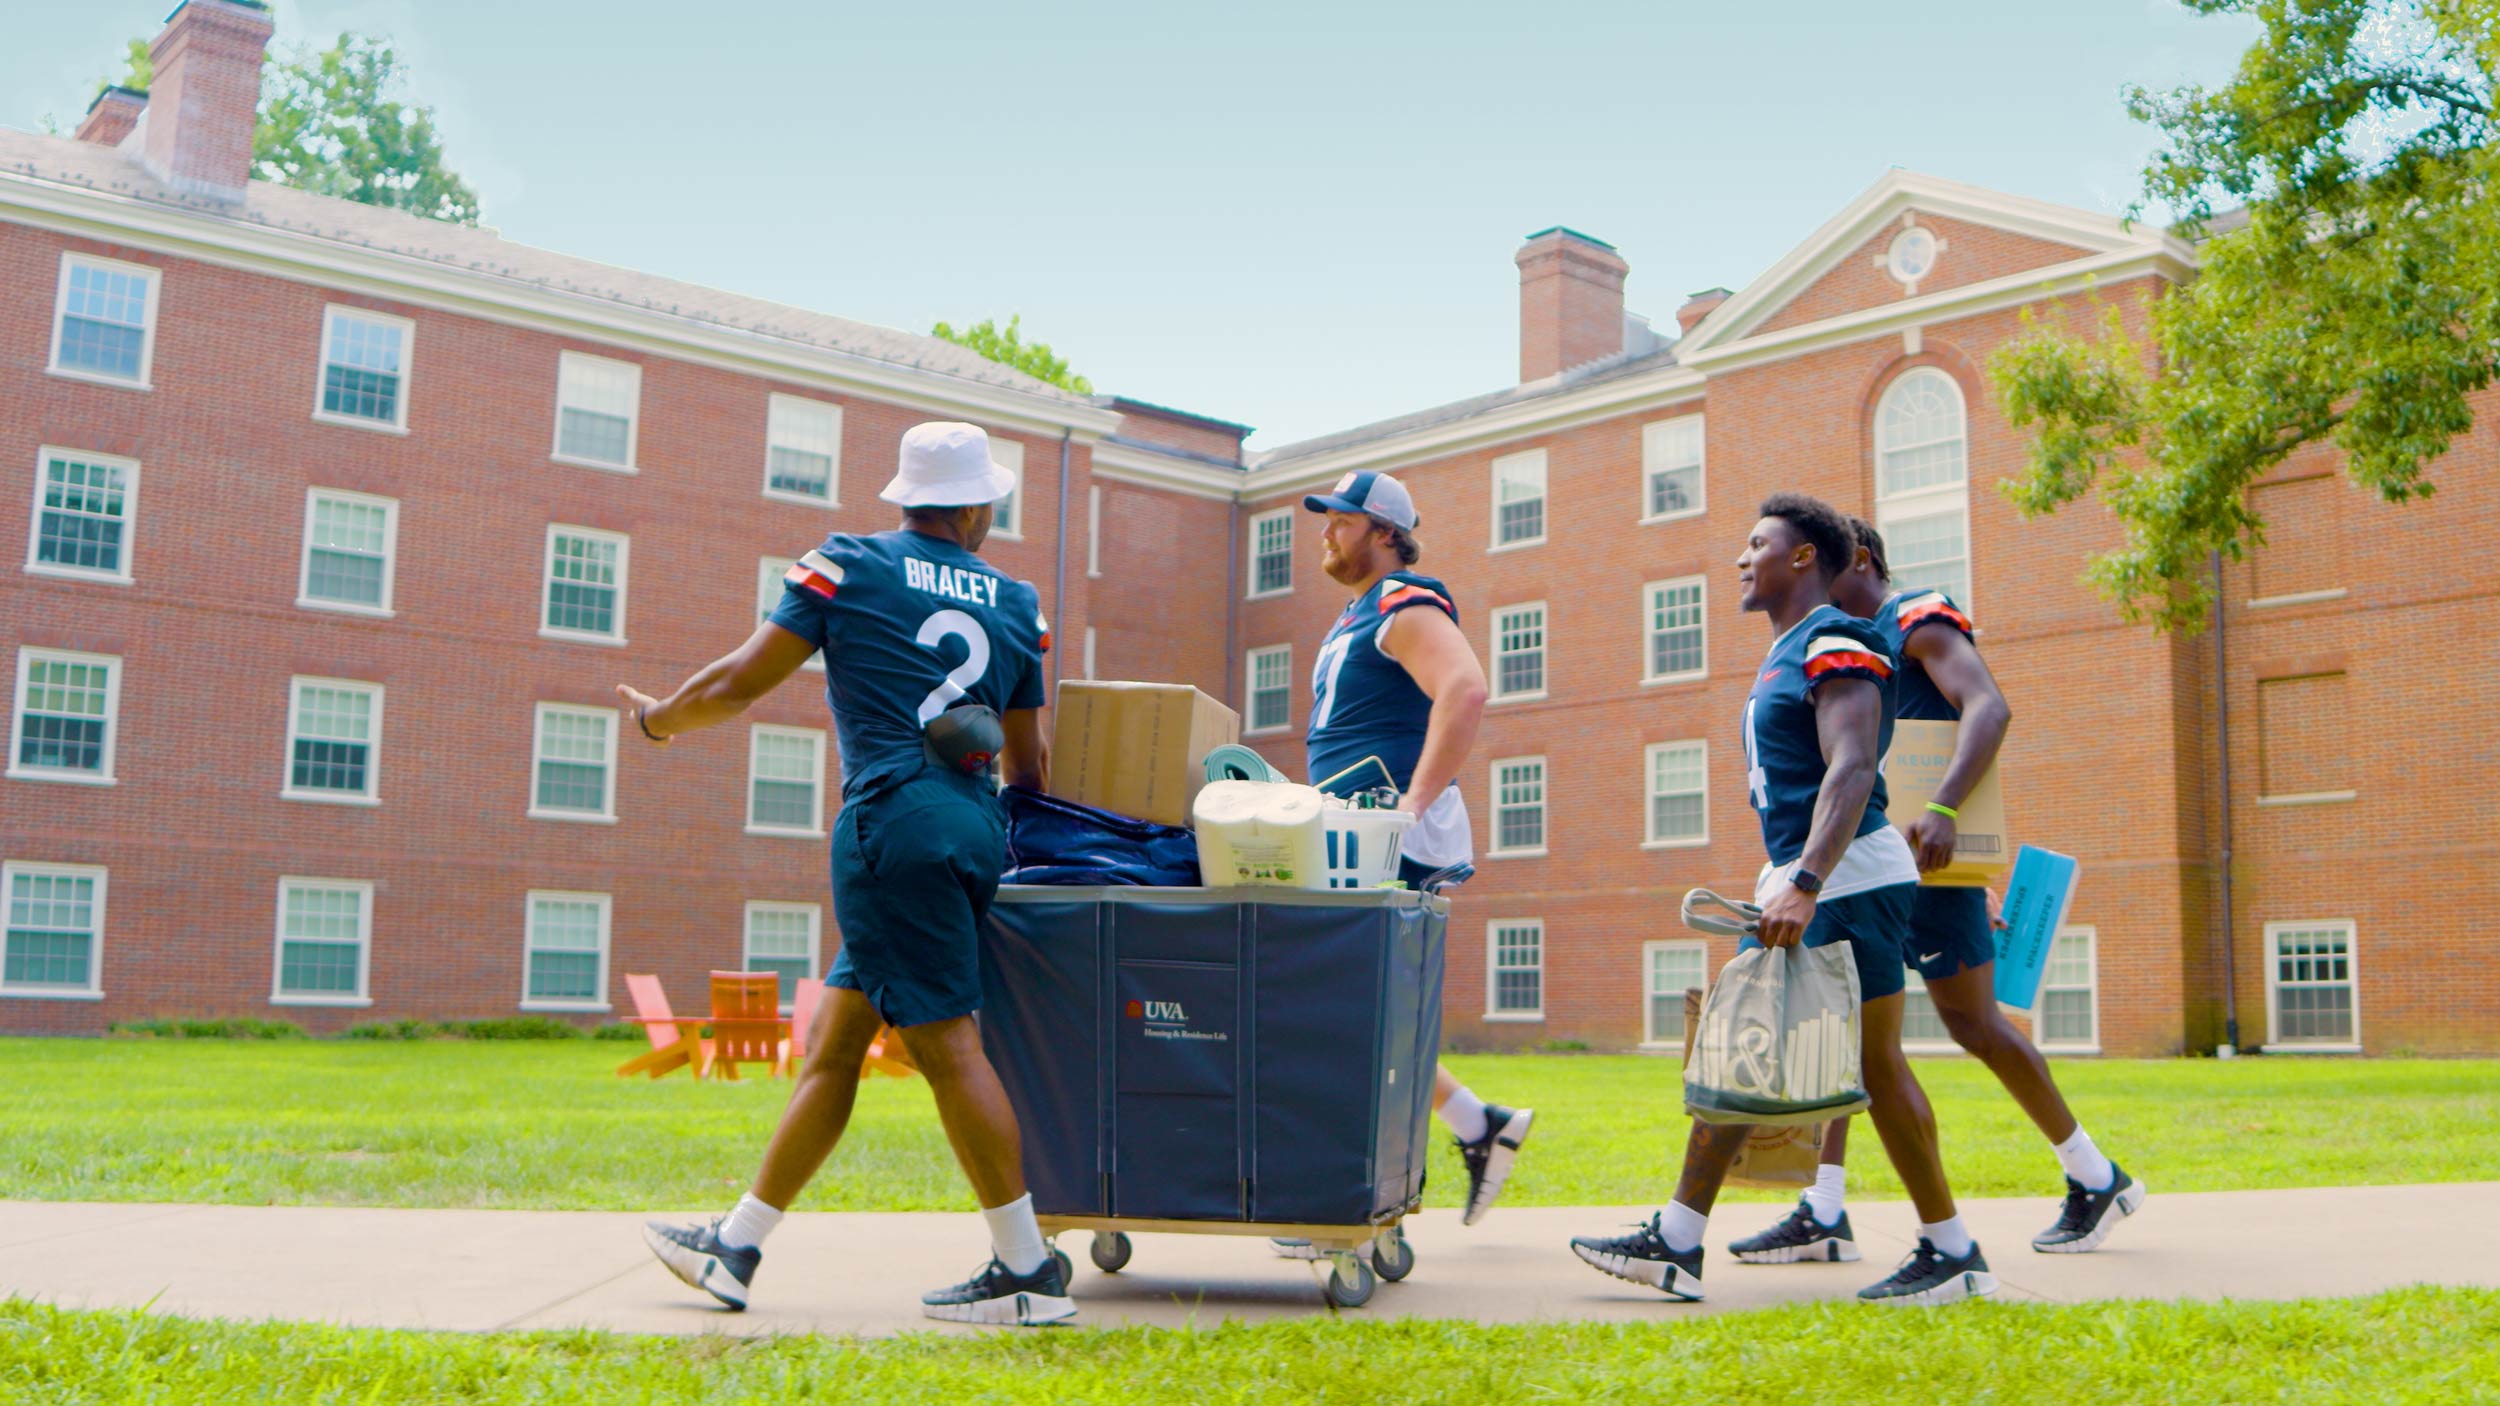 Football players escorting belongings to their new dorm